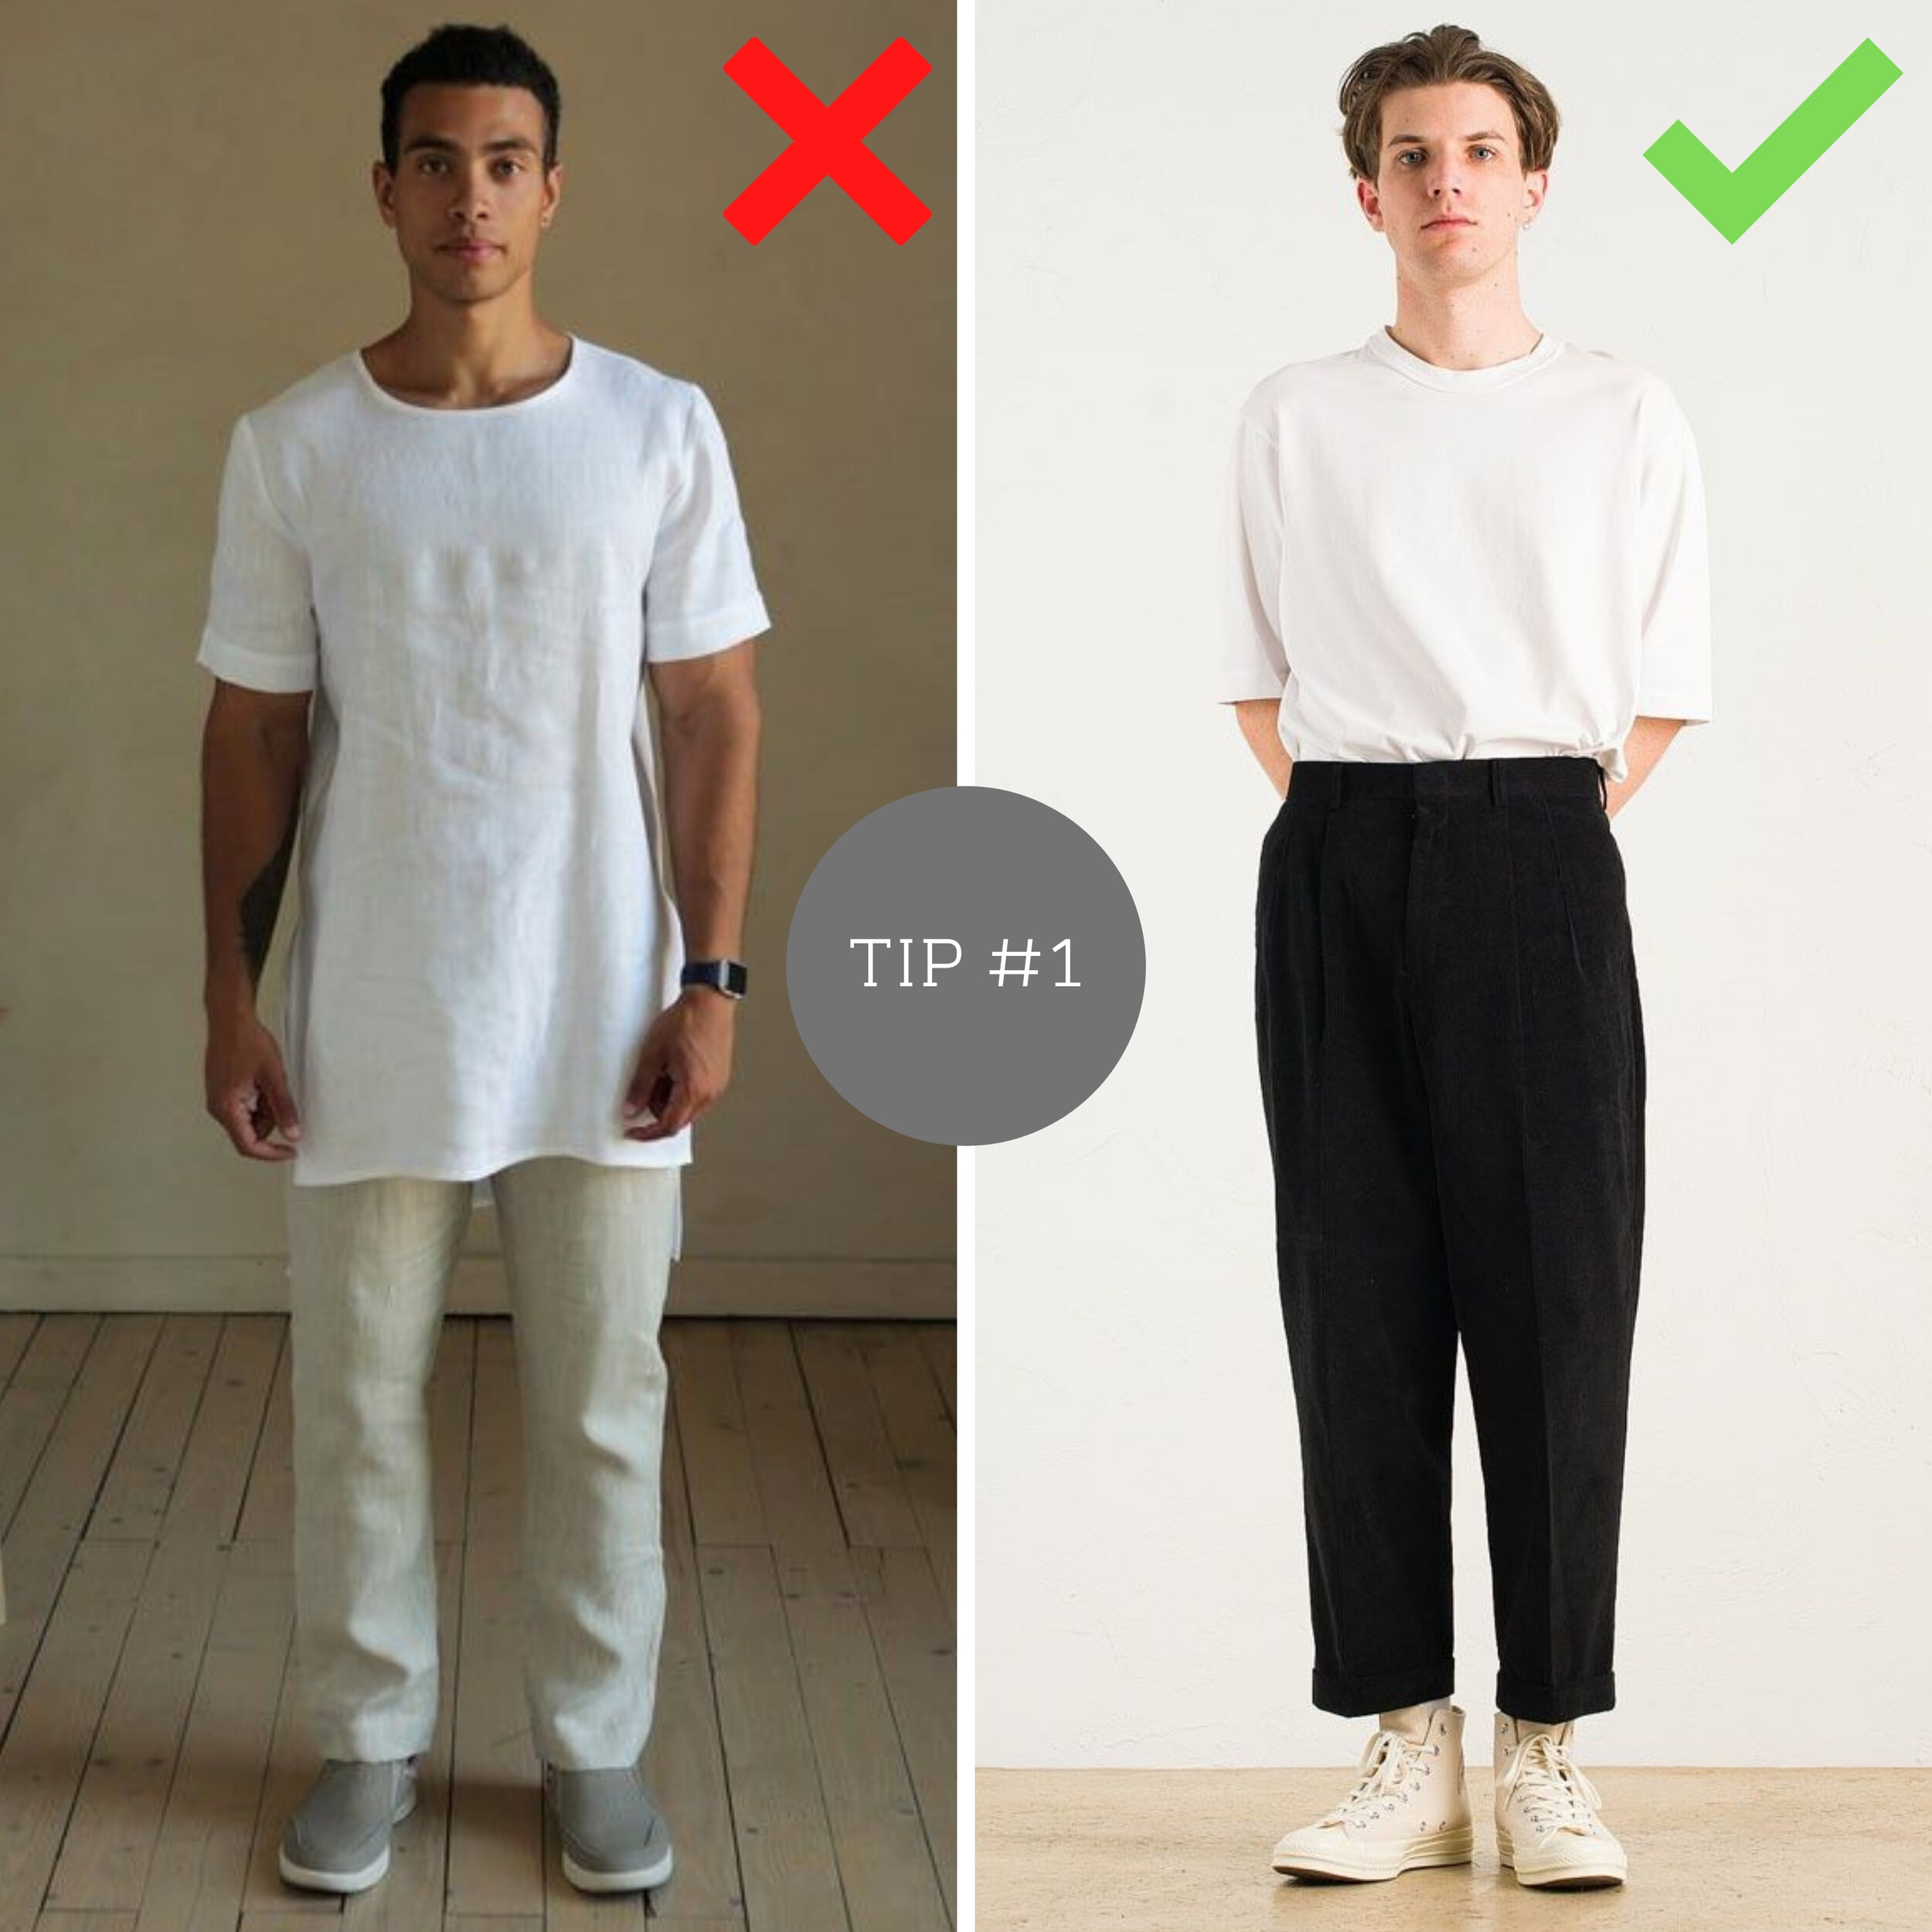 How To Look Taller For Men  NYC Men's Personal Stylist